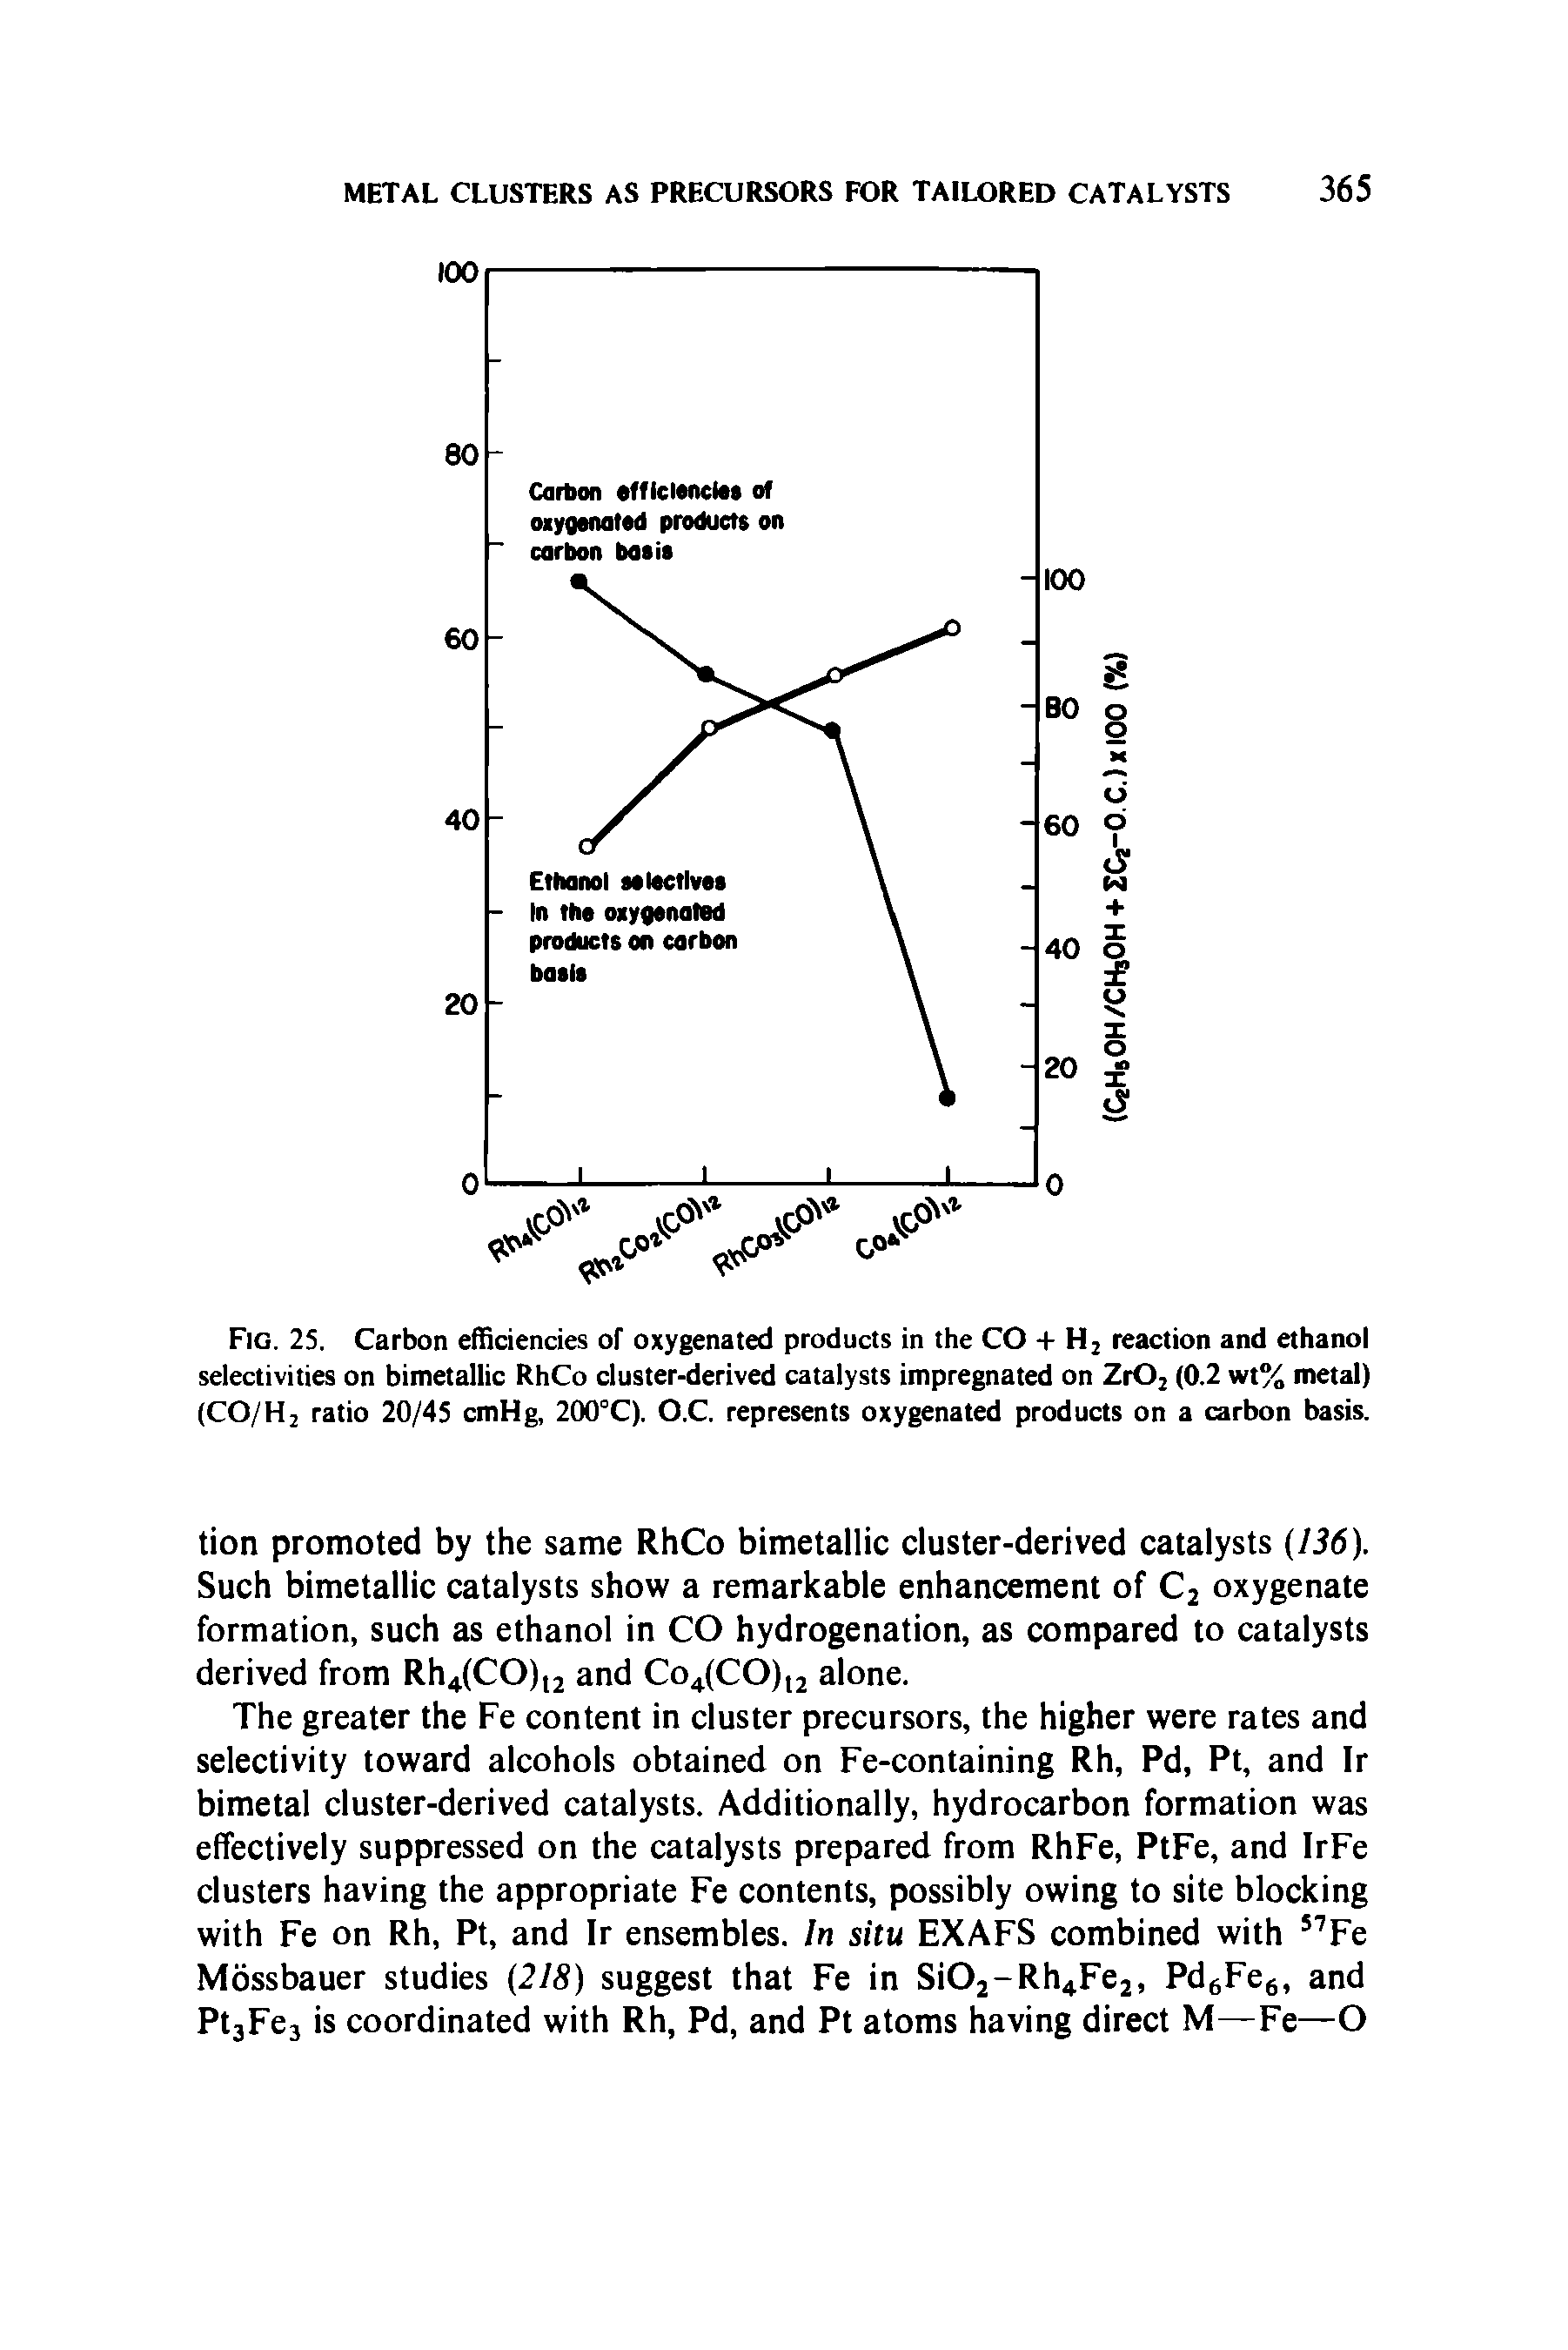 Fig. 25. Carbon efficiencies of oxygenated products in the CO + H2 reaction and ethanol selectivities on bimetallic RhCo cluster-derived catalysts impregnated on Zr02 (0.2 wt% metal) (CO/H2 ratio 20/45 cmHg, 200°C). O.C. represents oxygenated products on a carbon basis.